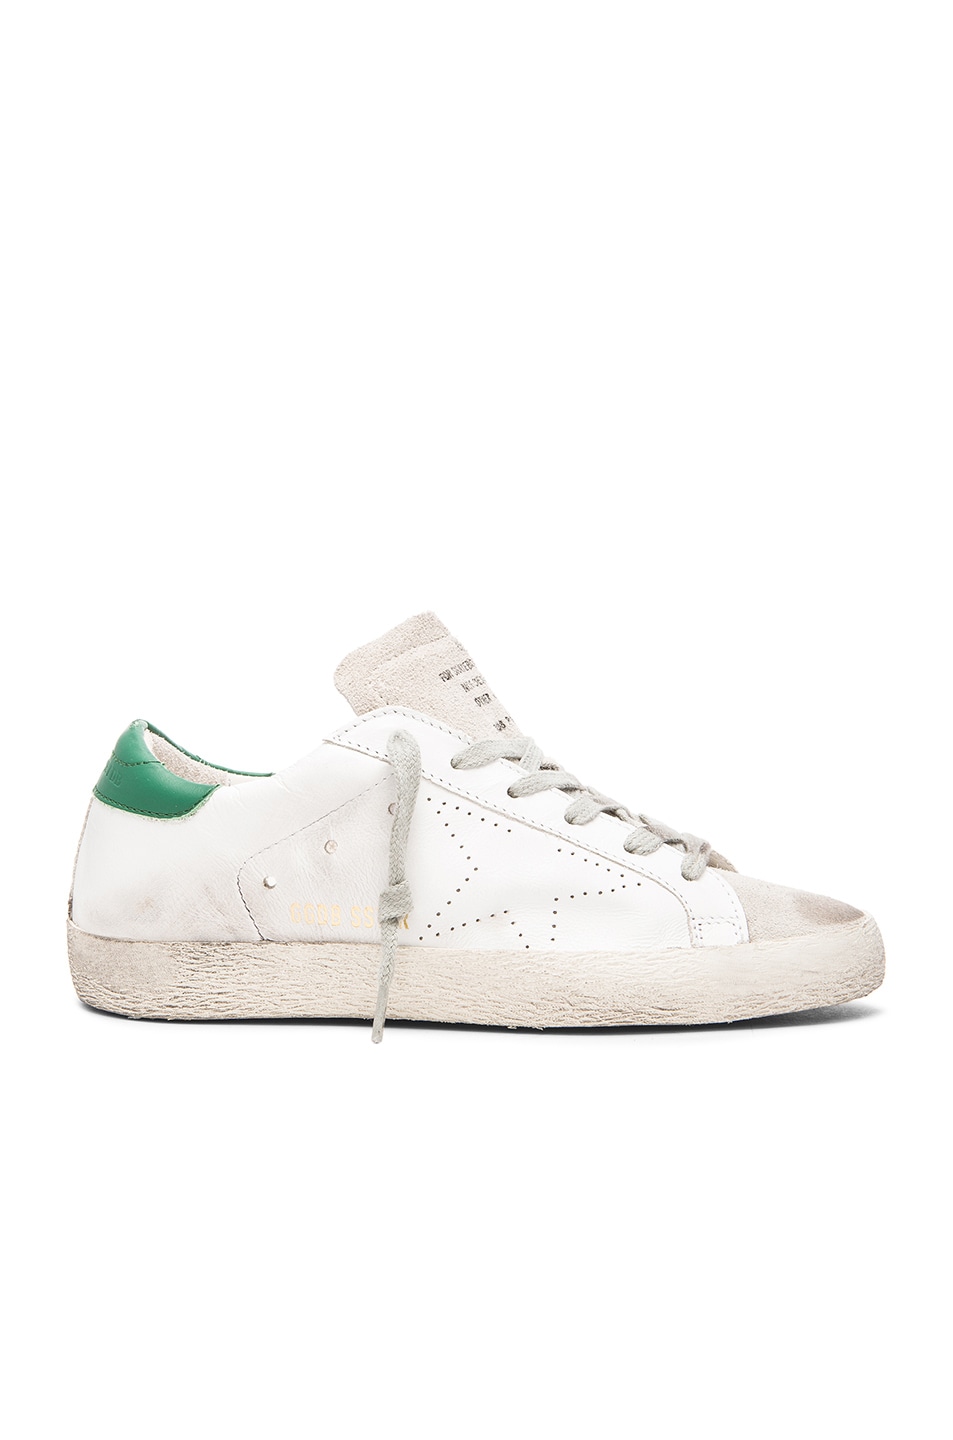 Image 1 of Golden Goose Superstar Low Top Leather Sneakers in Green & White